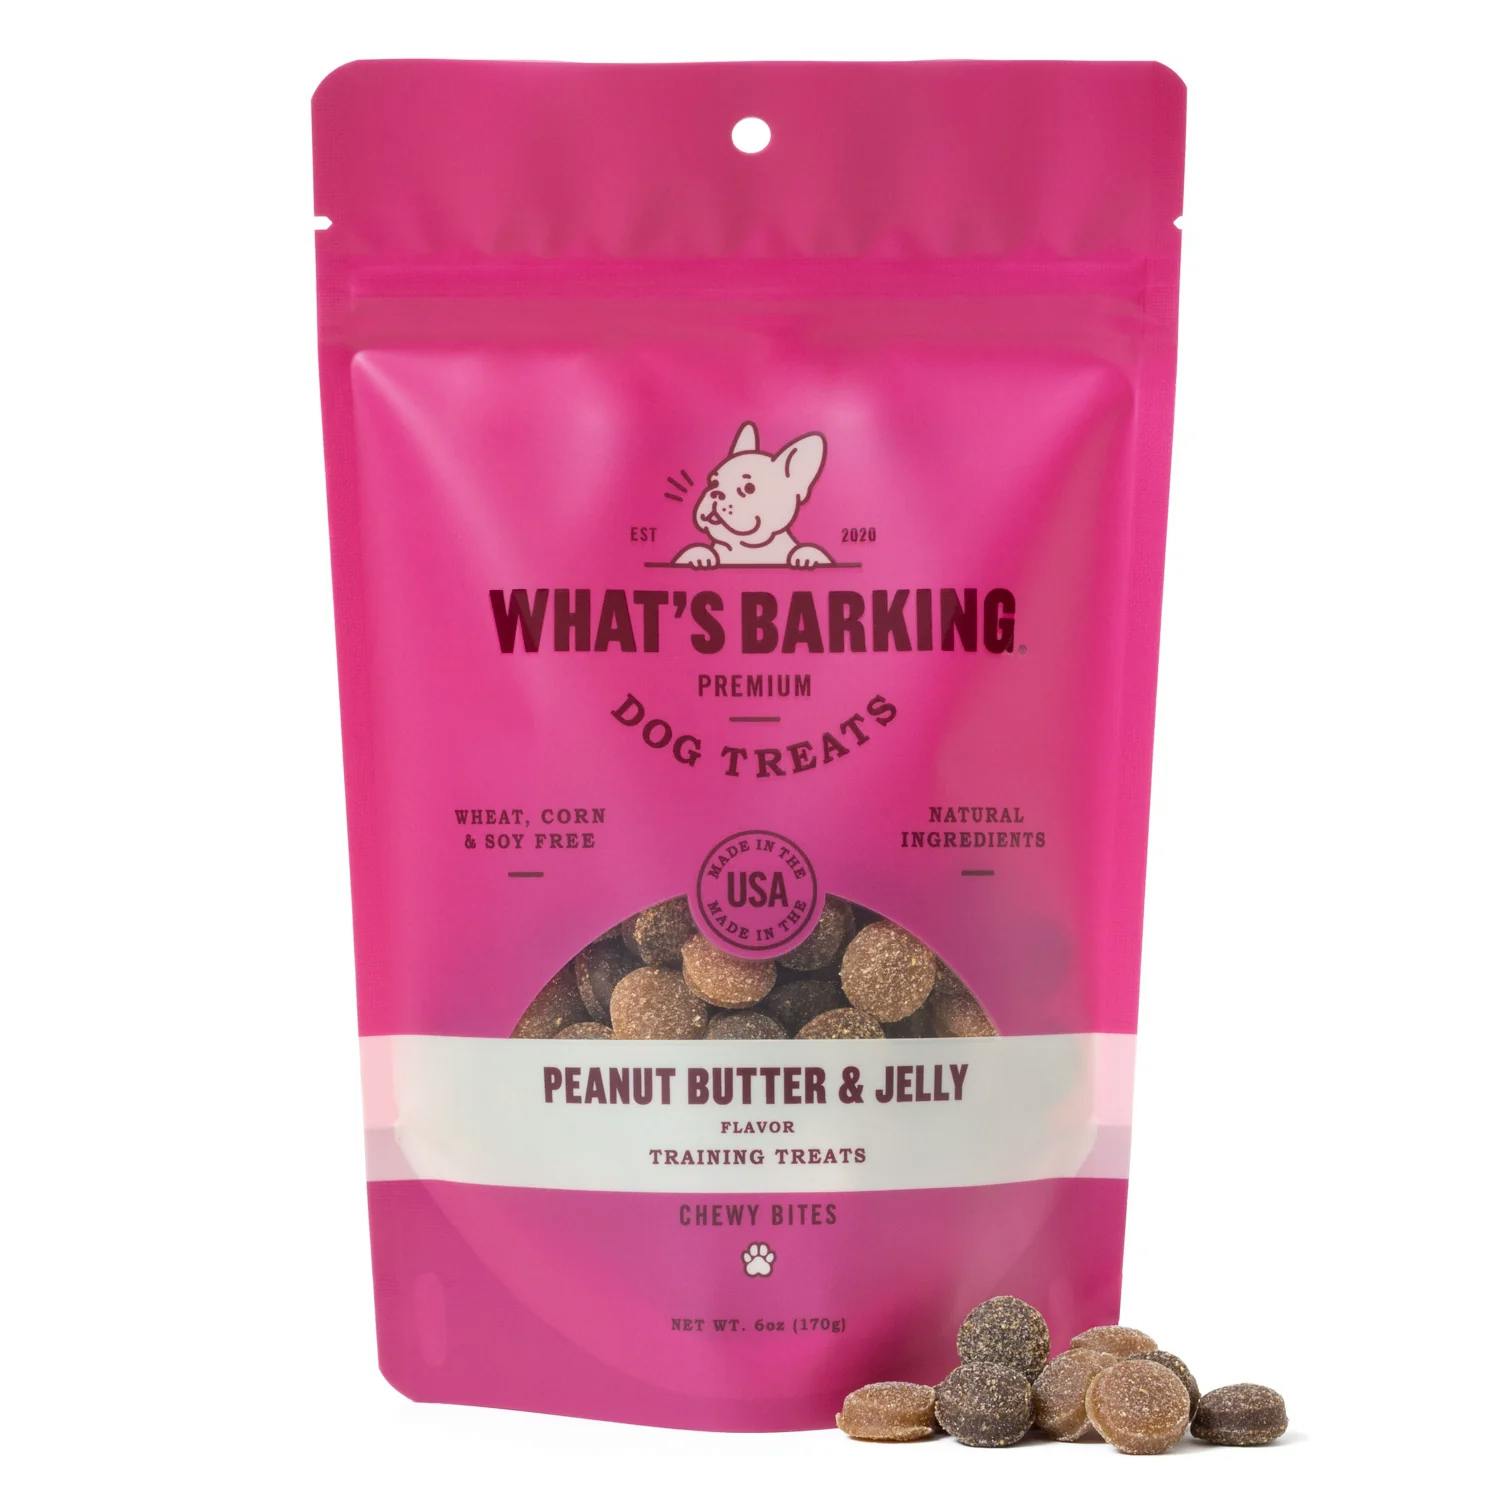 What's Barking Peanut Butter and Jelly Chewy Training Treat - Image 1